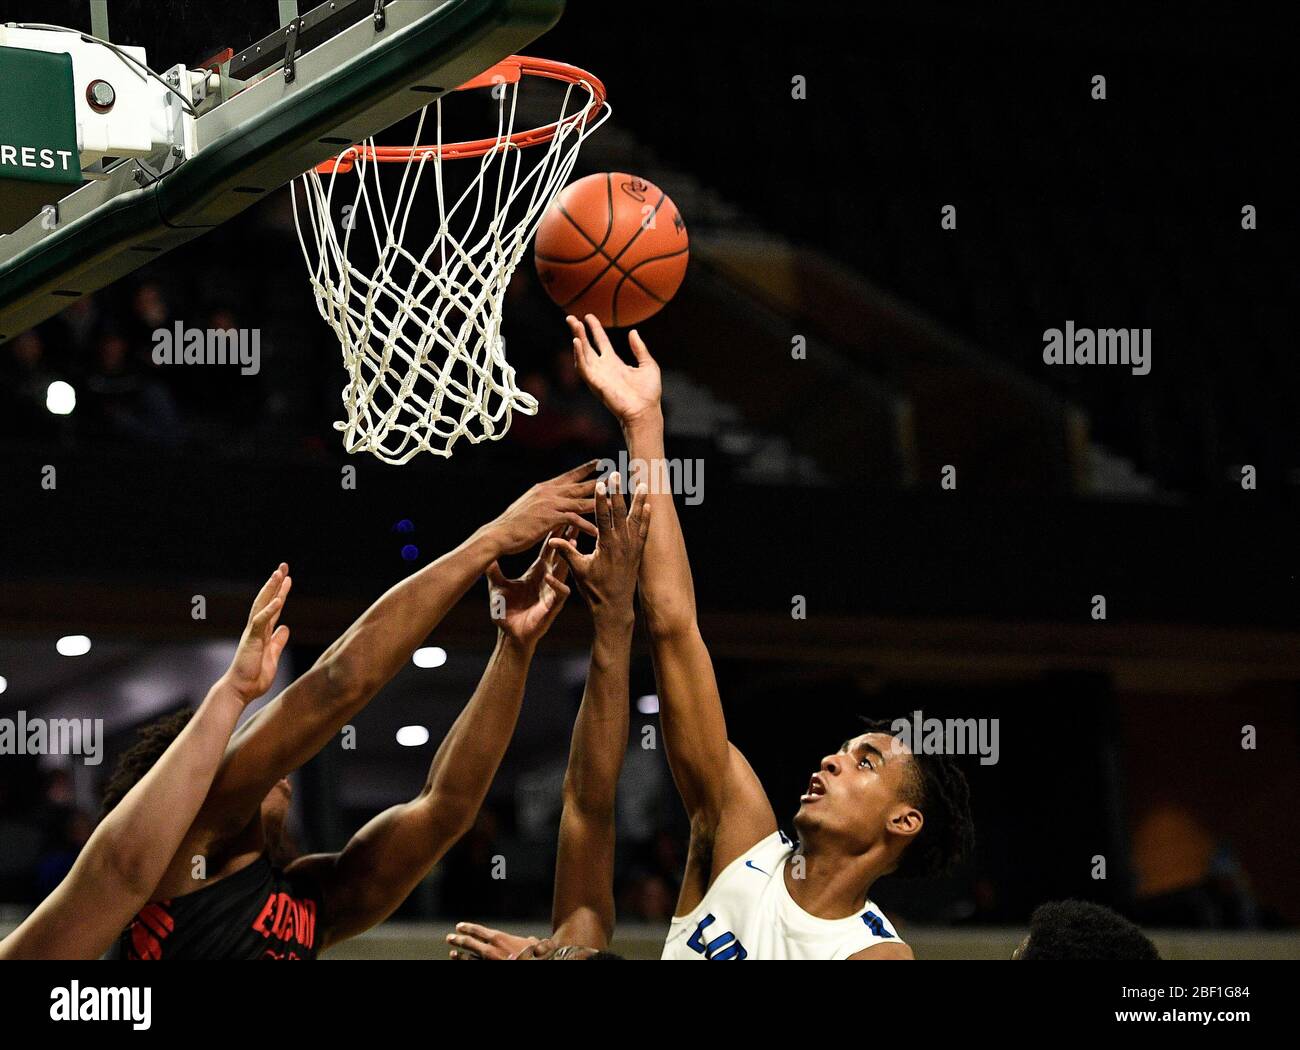 Ypsilanti, Michigan, USA. 20th Jan, 2020. Lincoln H.S. Forward Emoni Bates (21) during a game between Lincoln H.S. and Detroit Edison H.S. Ypsilanti, Michigan. Emoni Bates 16 years old, won the 2020 Gatorade National High School Player of the year, the first sophomore to win the prestigious award.Lincoln H.S. won the game 75-68 Credit: Scott Hasse/ZUMA Wire/Alamy Live News Stock Photo